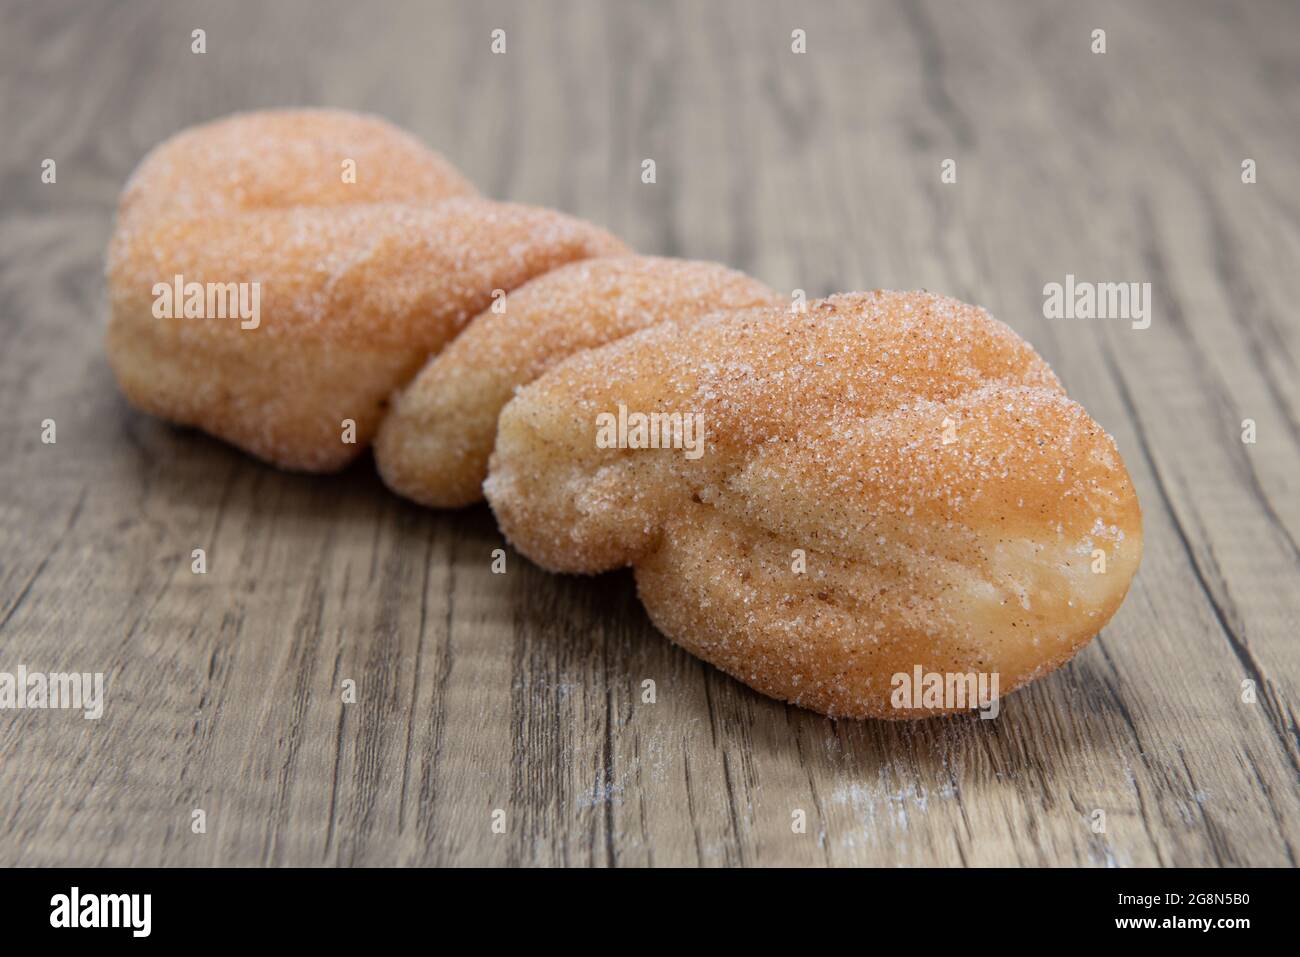 Sugar twist donut is textured with sugar coating for a sweet treat delight. Stock Photo